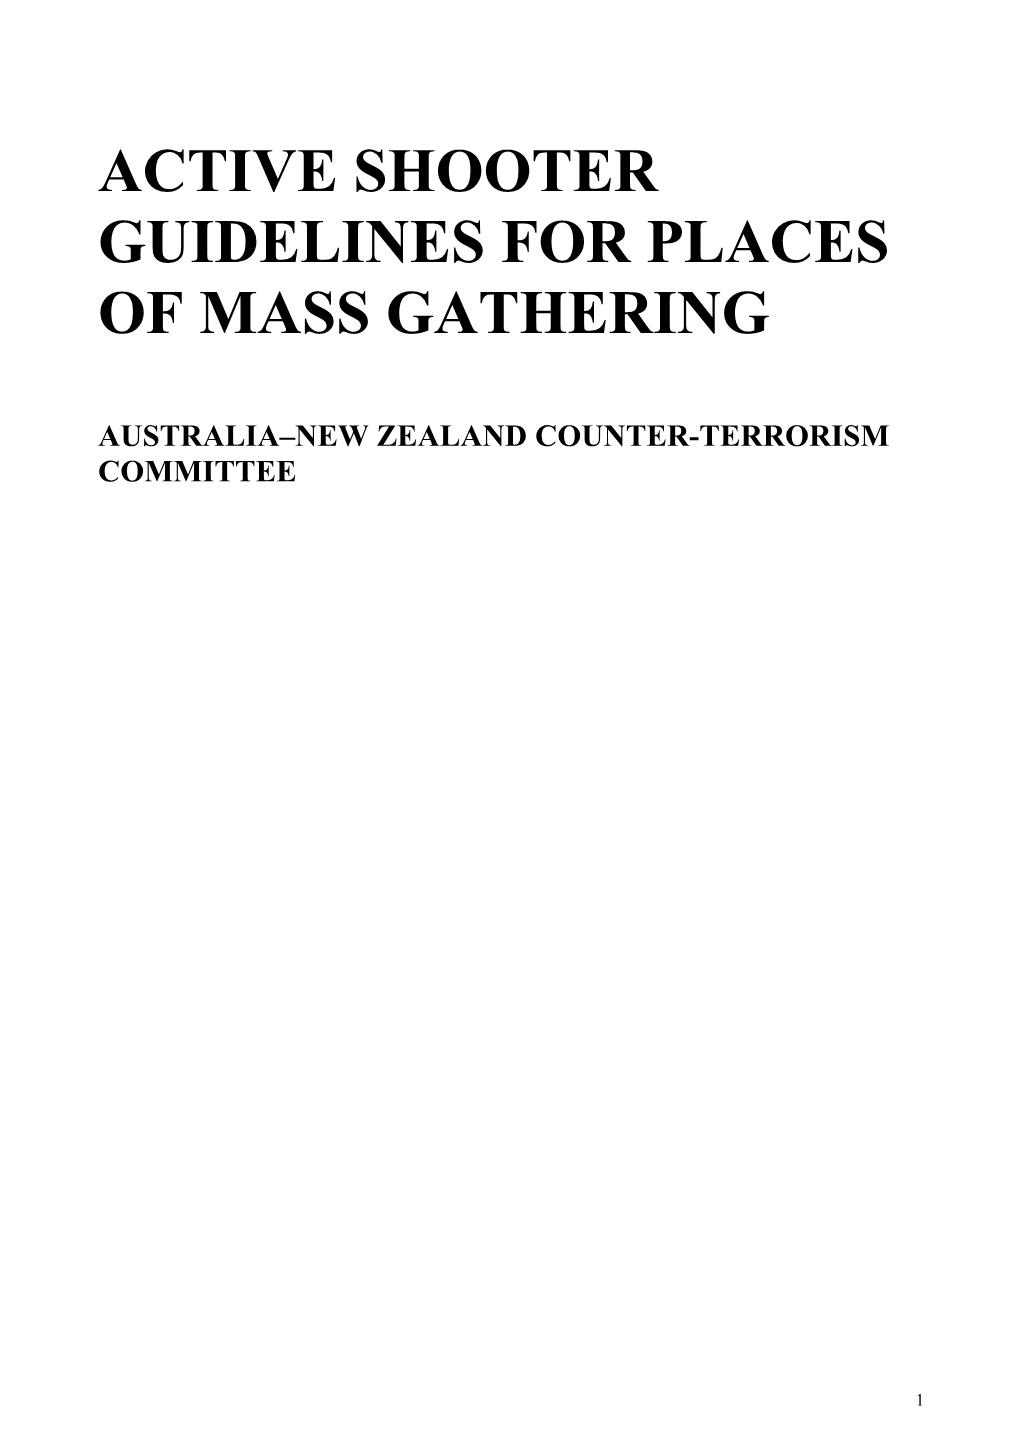 Active Shooter Guidelines for Places of Mass Gathering